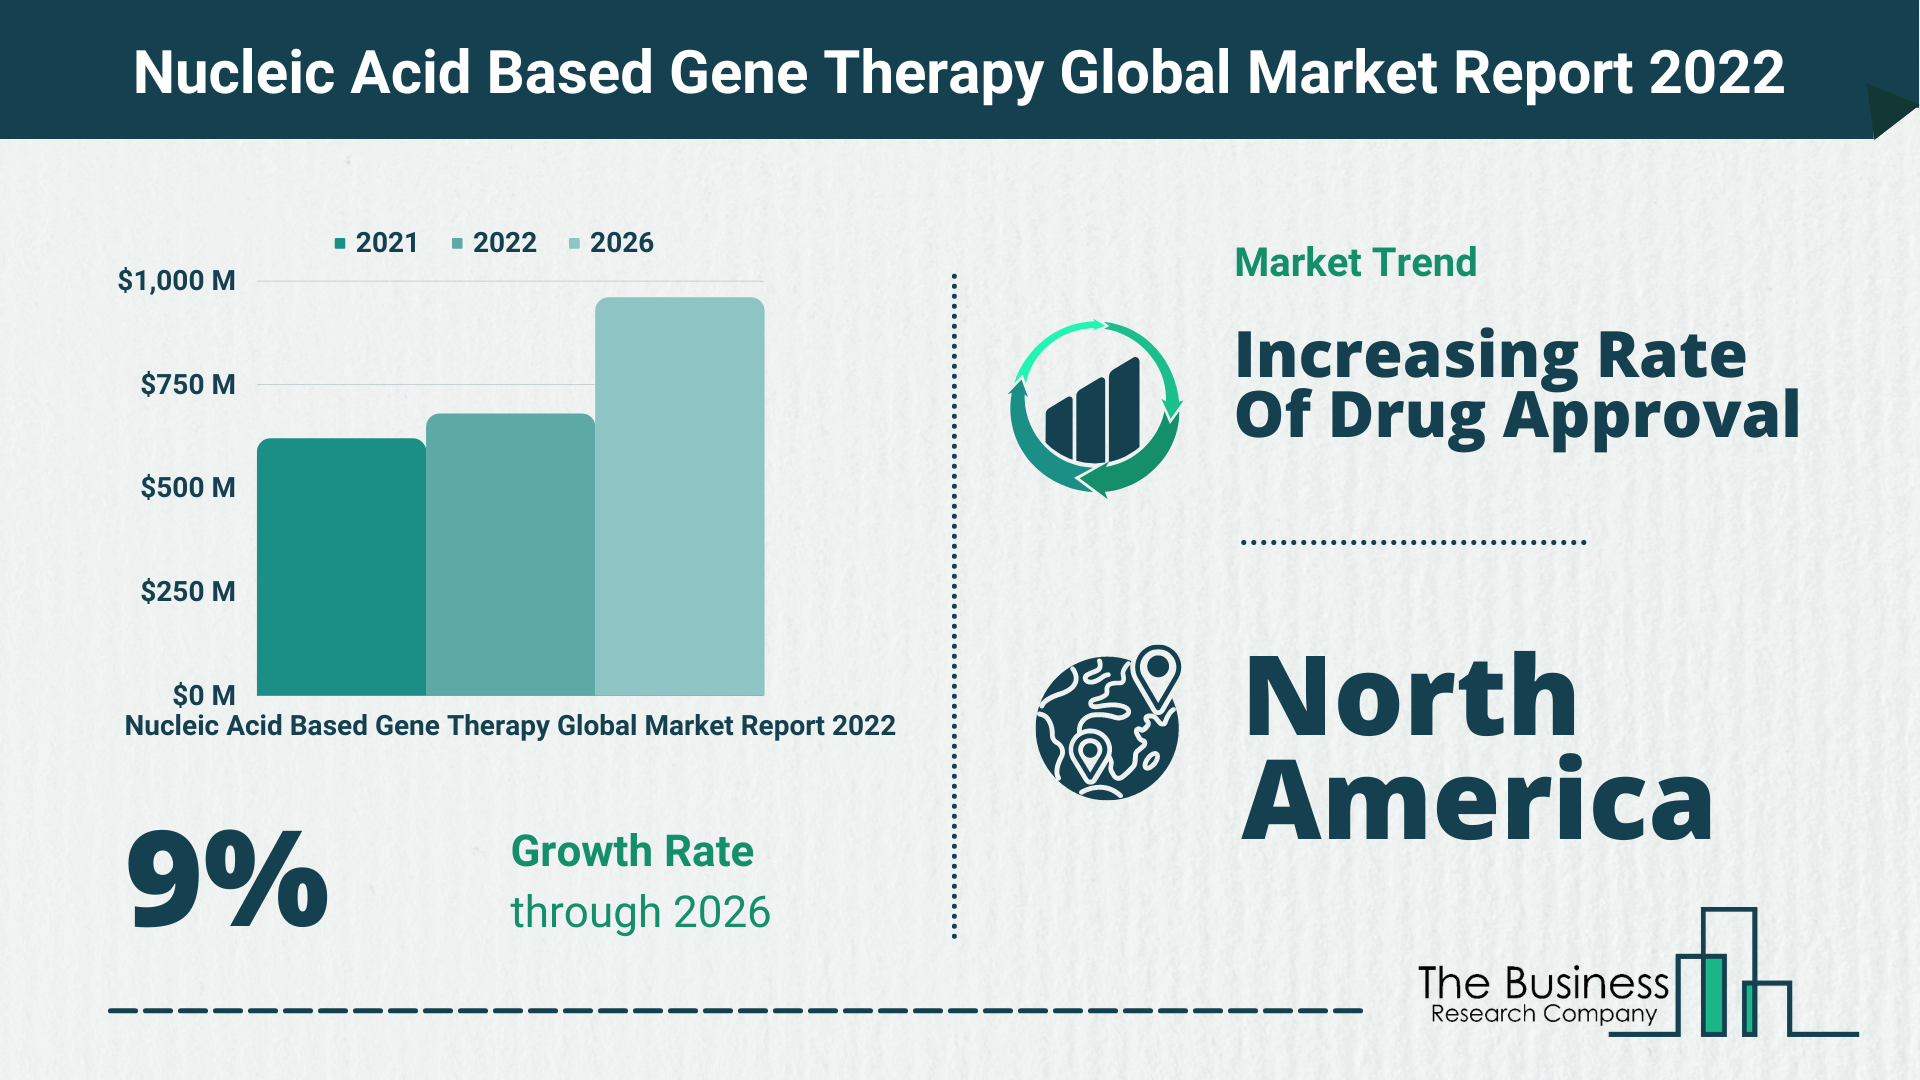 How Will The Nucleic Acid-Based Gene Therapy Market Grow In 2022?